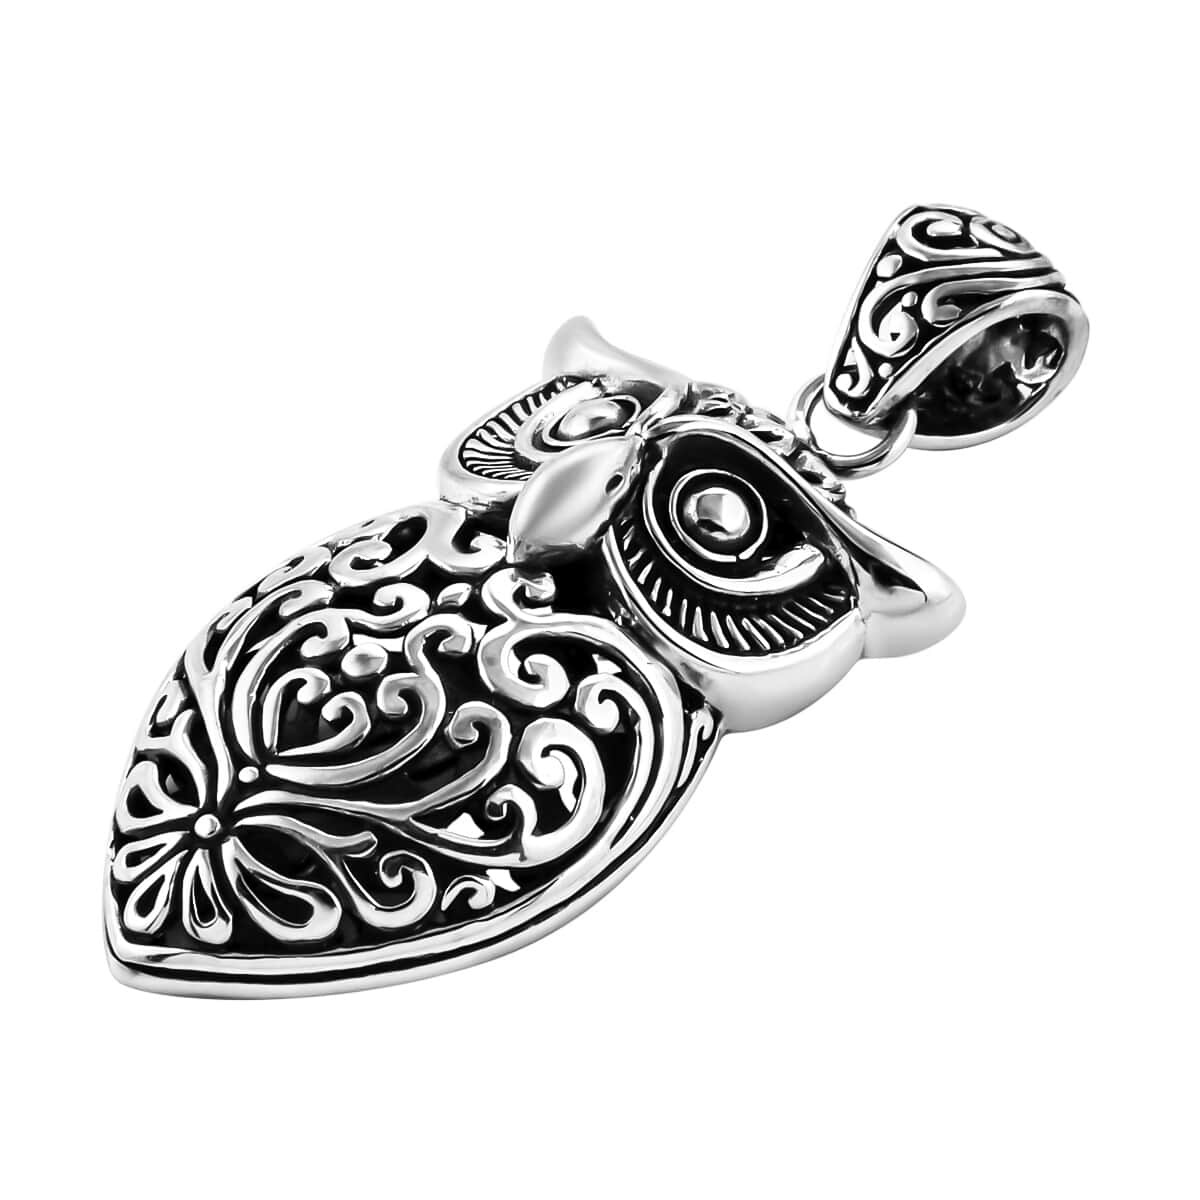 Bali Legacy Sterling Silver Owl Pendant, Silver Jewelry For Women, Stylish Pendant in Silver 9.1 grams image number 3